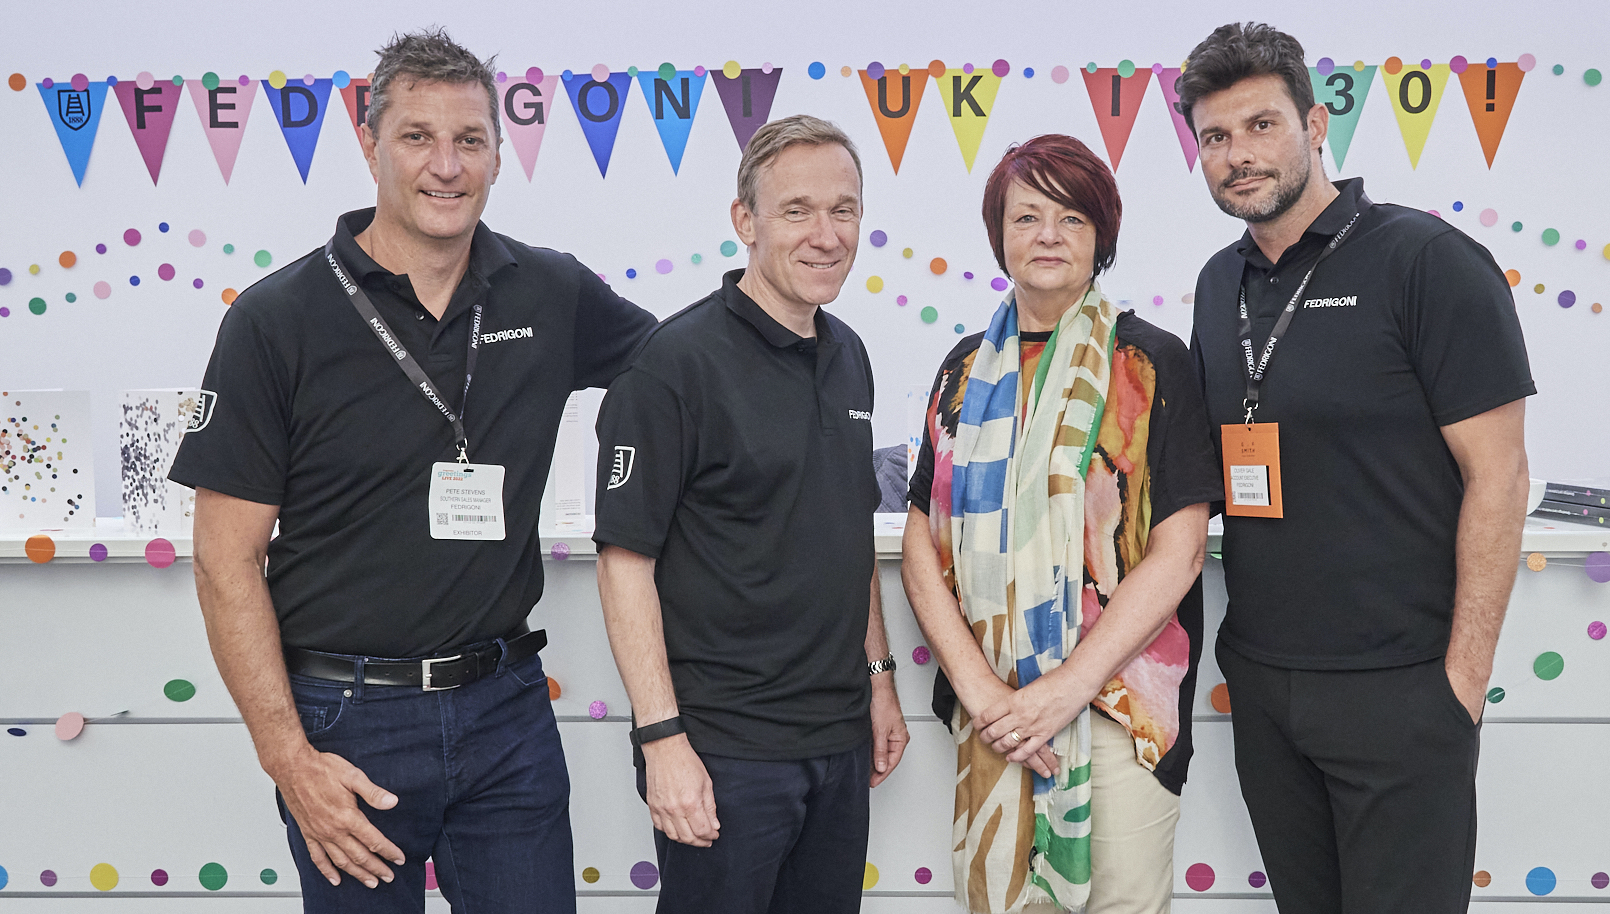 Above: Pete Stevens (far left) and colleagues celebrating 30 years of Fedrigoni in the UK at PG Live 2022 where it sponsored the Gallery Hall lunchroom area